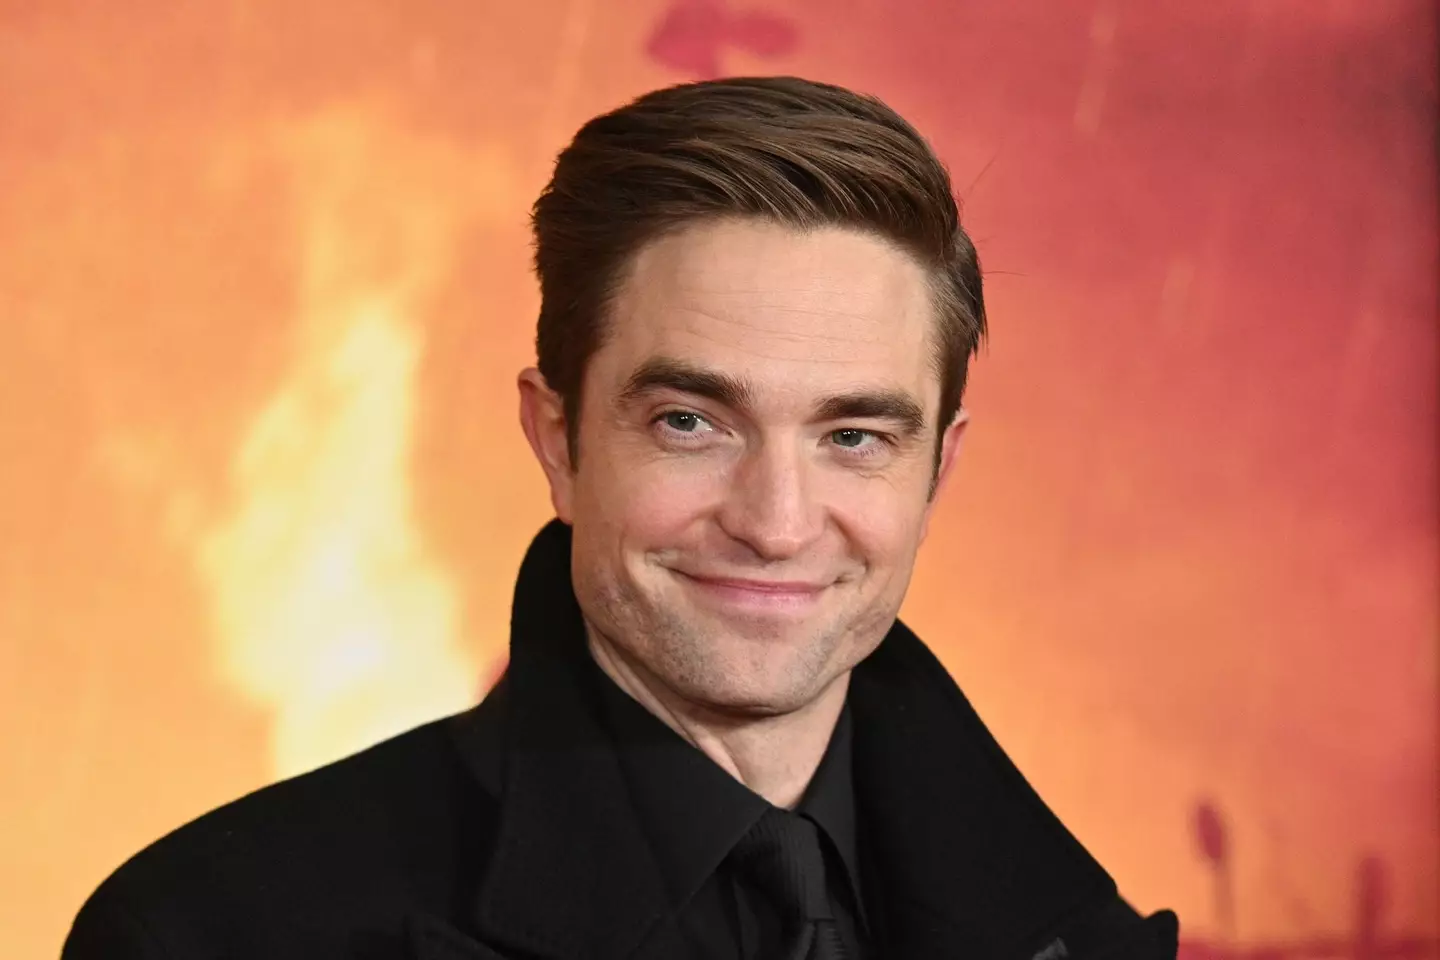 Robert Pattinson was meant to play a serial killer (